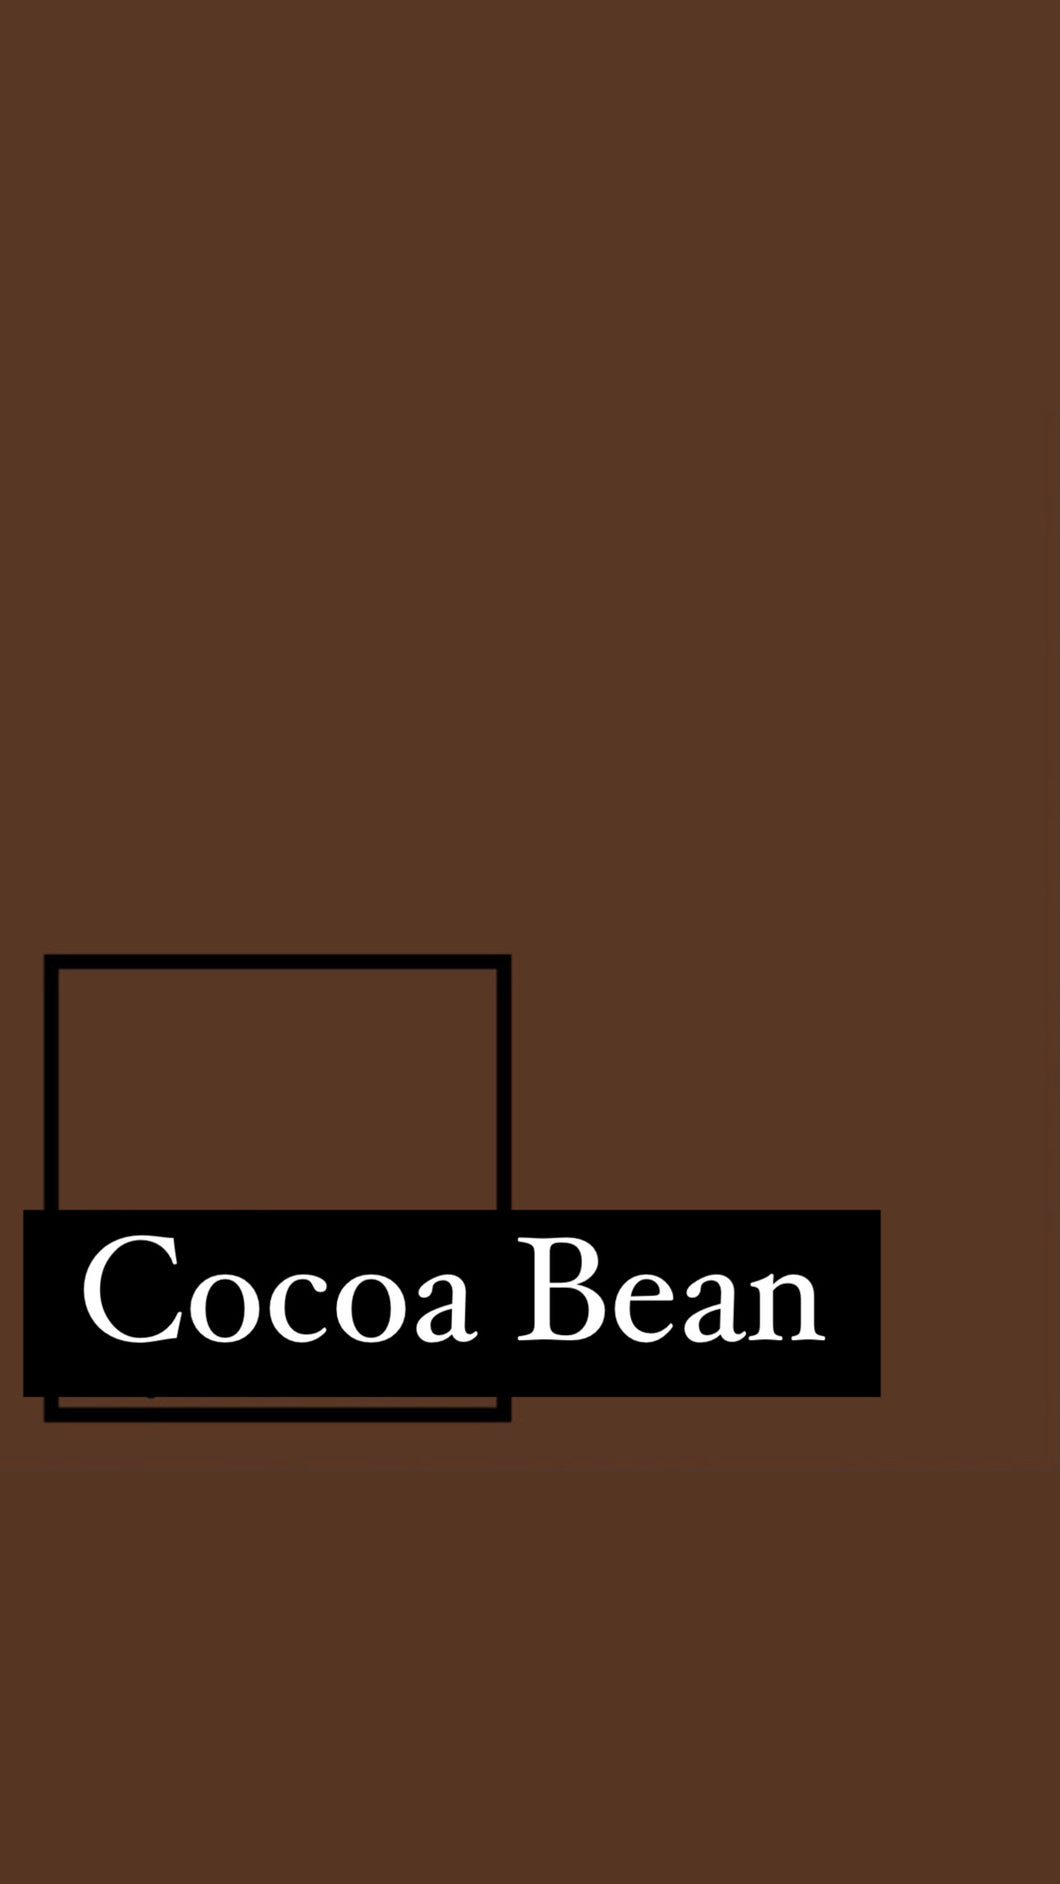 Name Tags for Cloth Nappies - COCOA BEAN